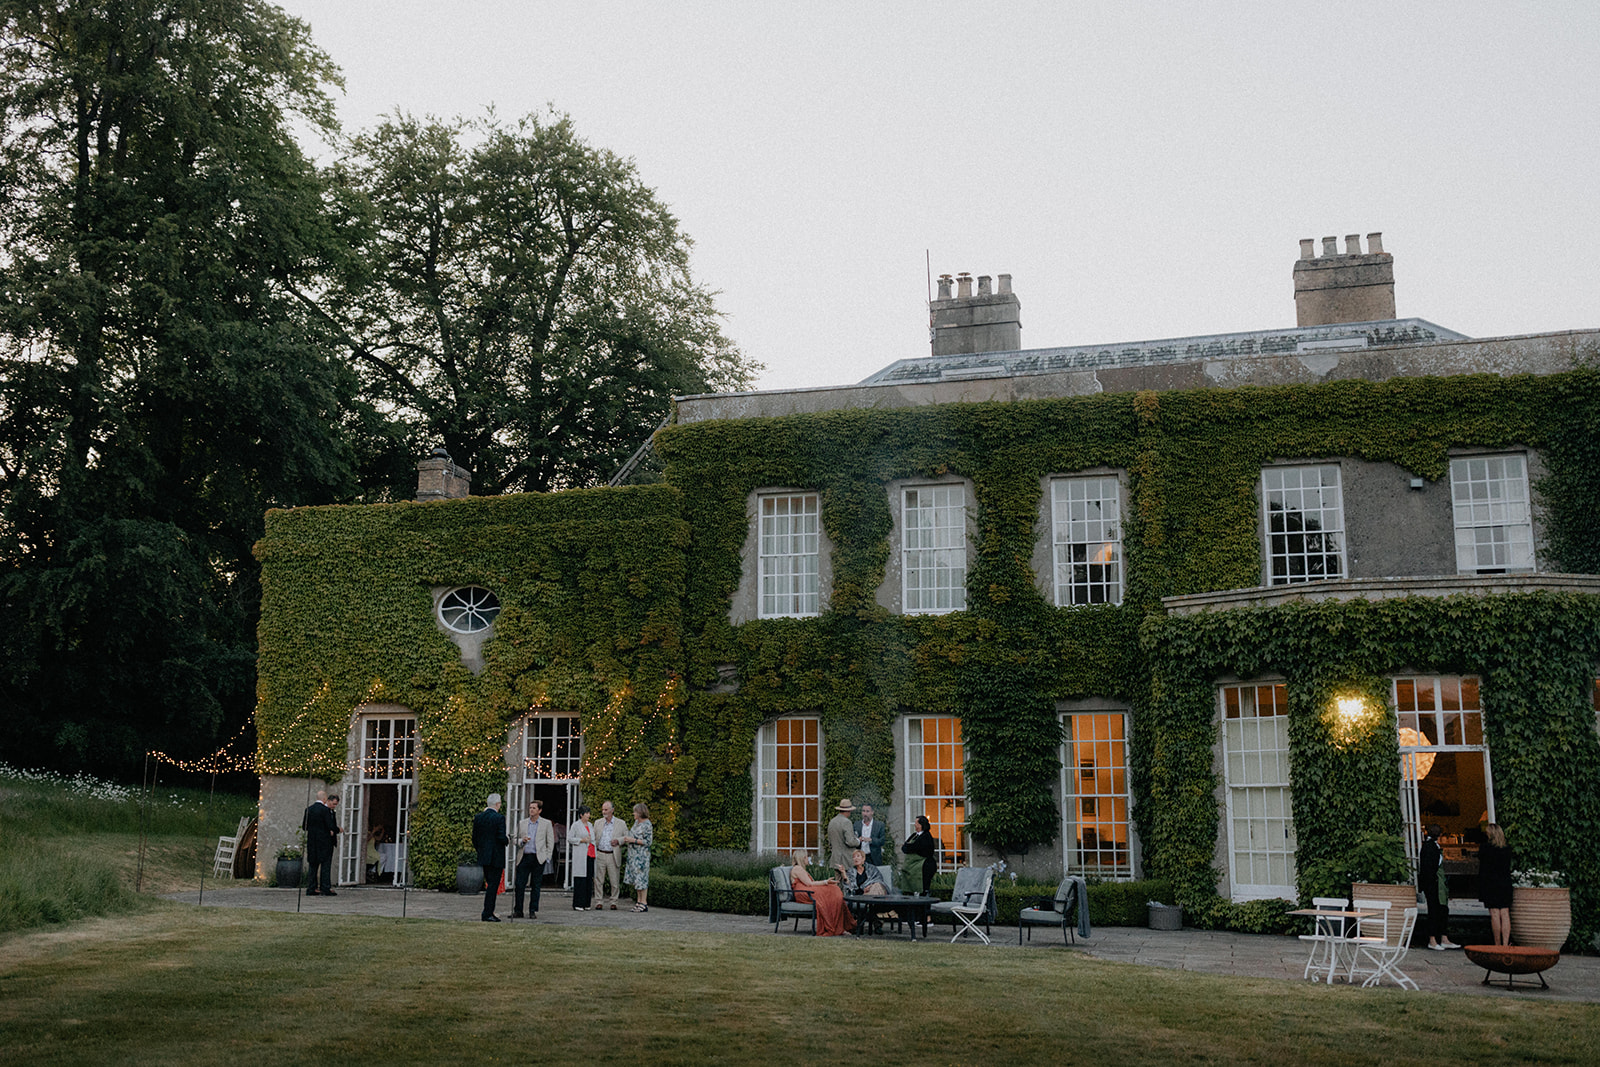 Stylish wedding at Findon Place in Sussex